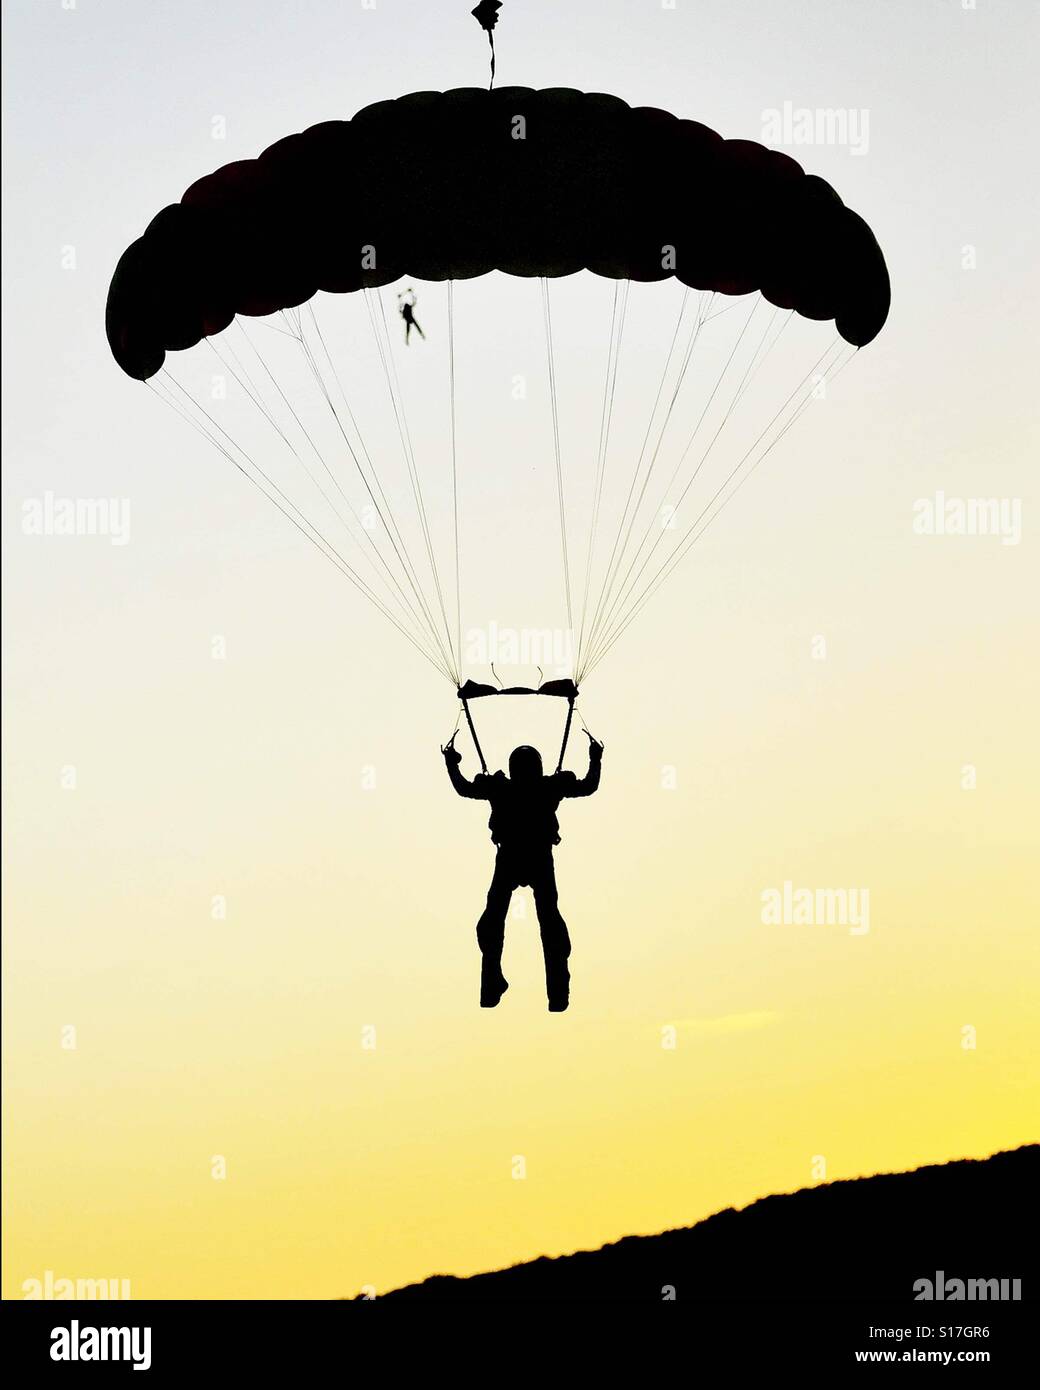 Silhouette of a skydiver at night Stock Photo